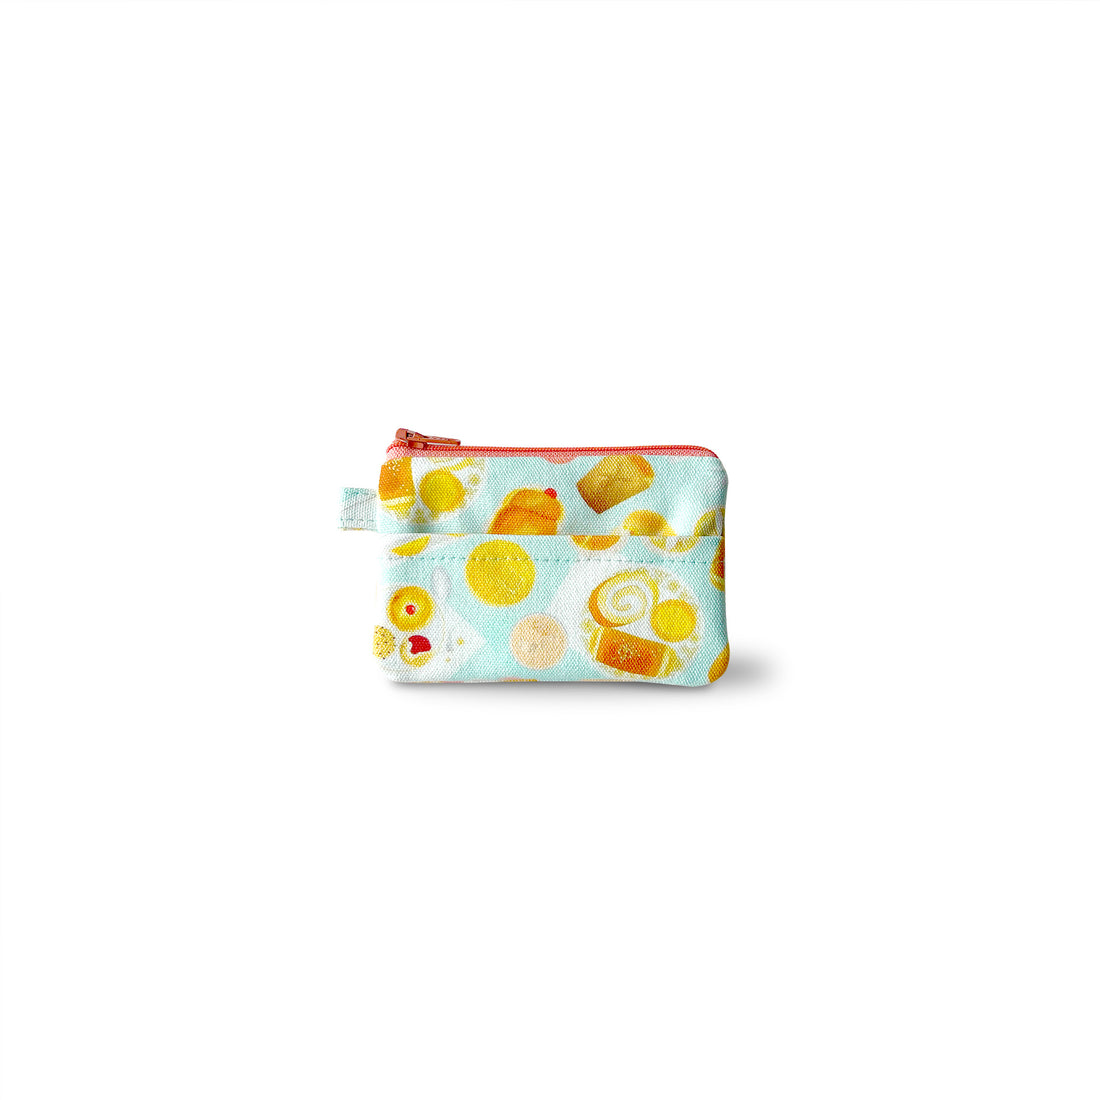 Chinese bakery coin purse by I&